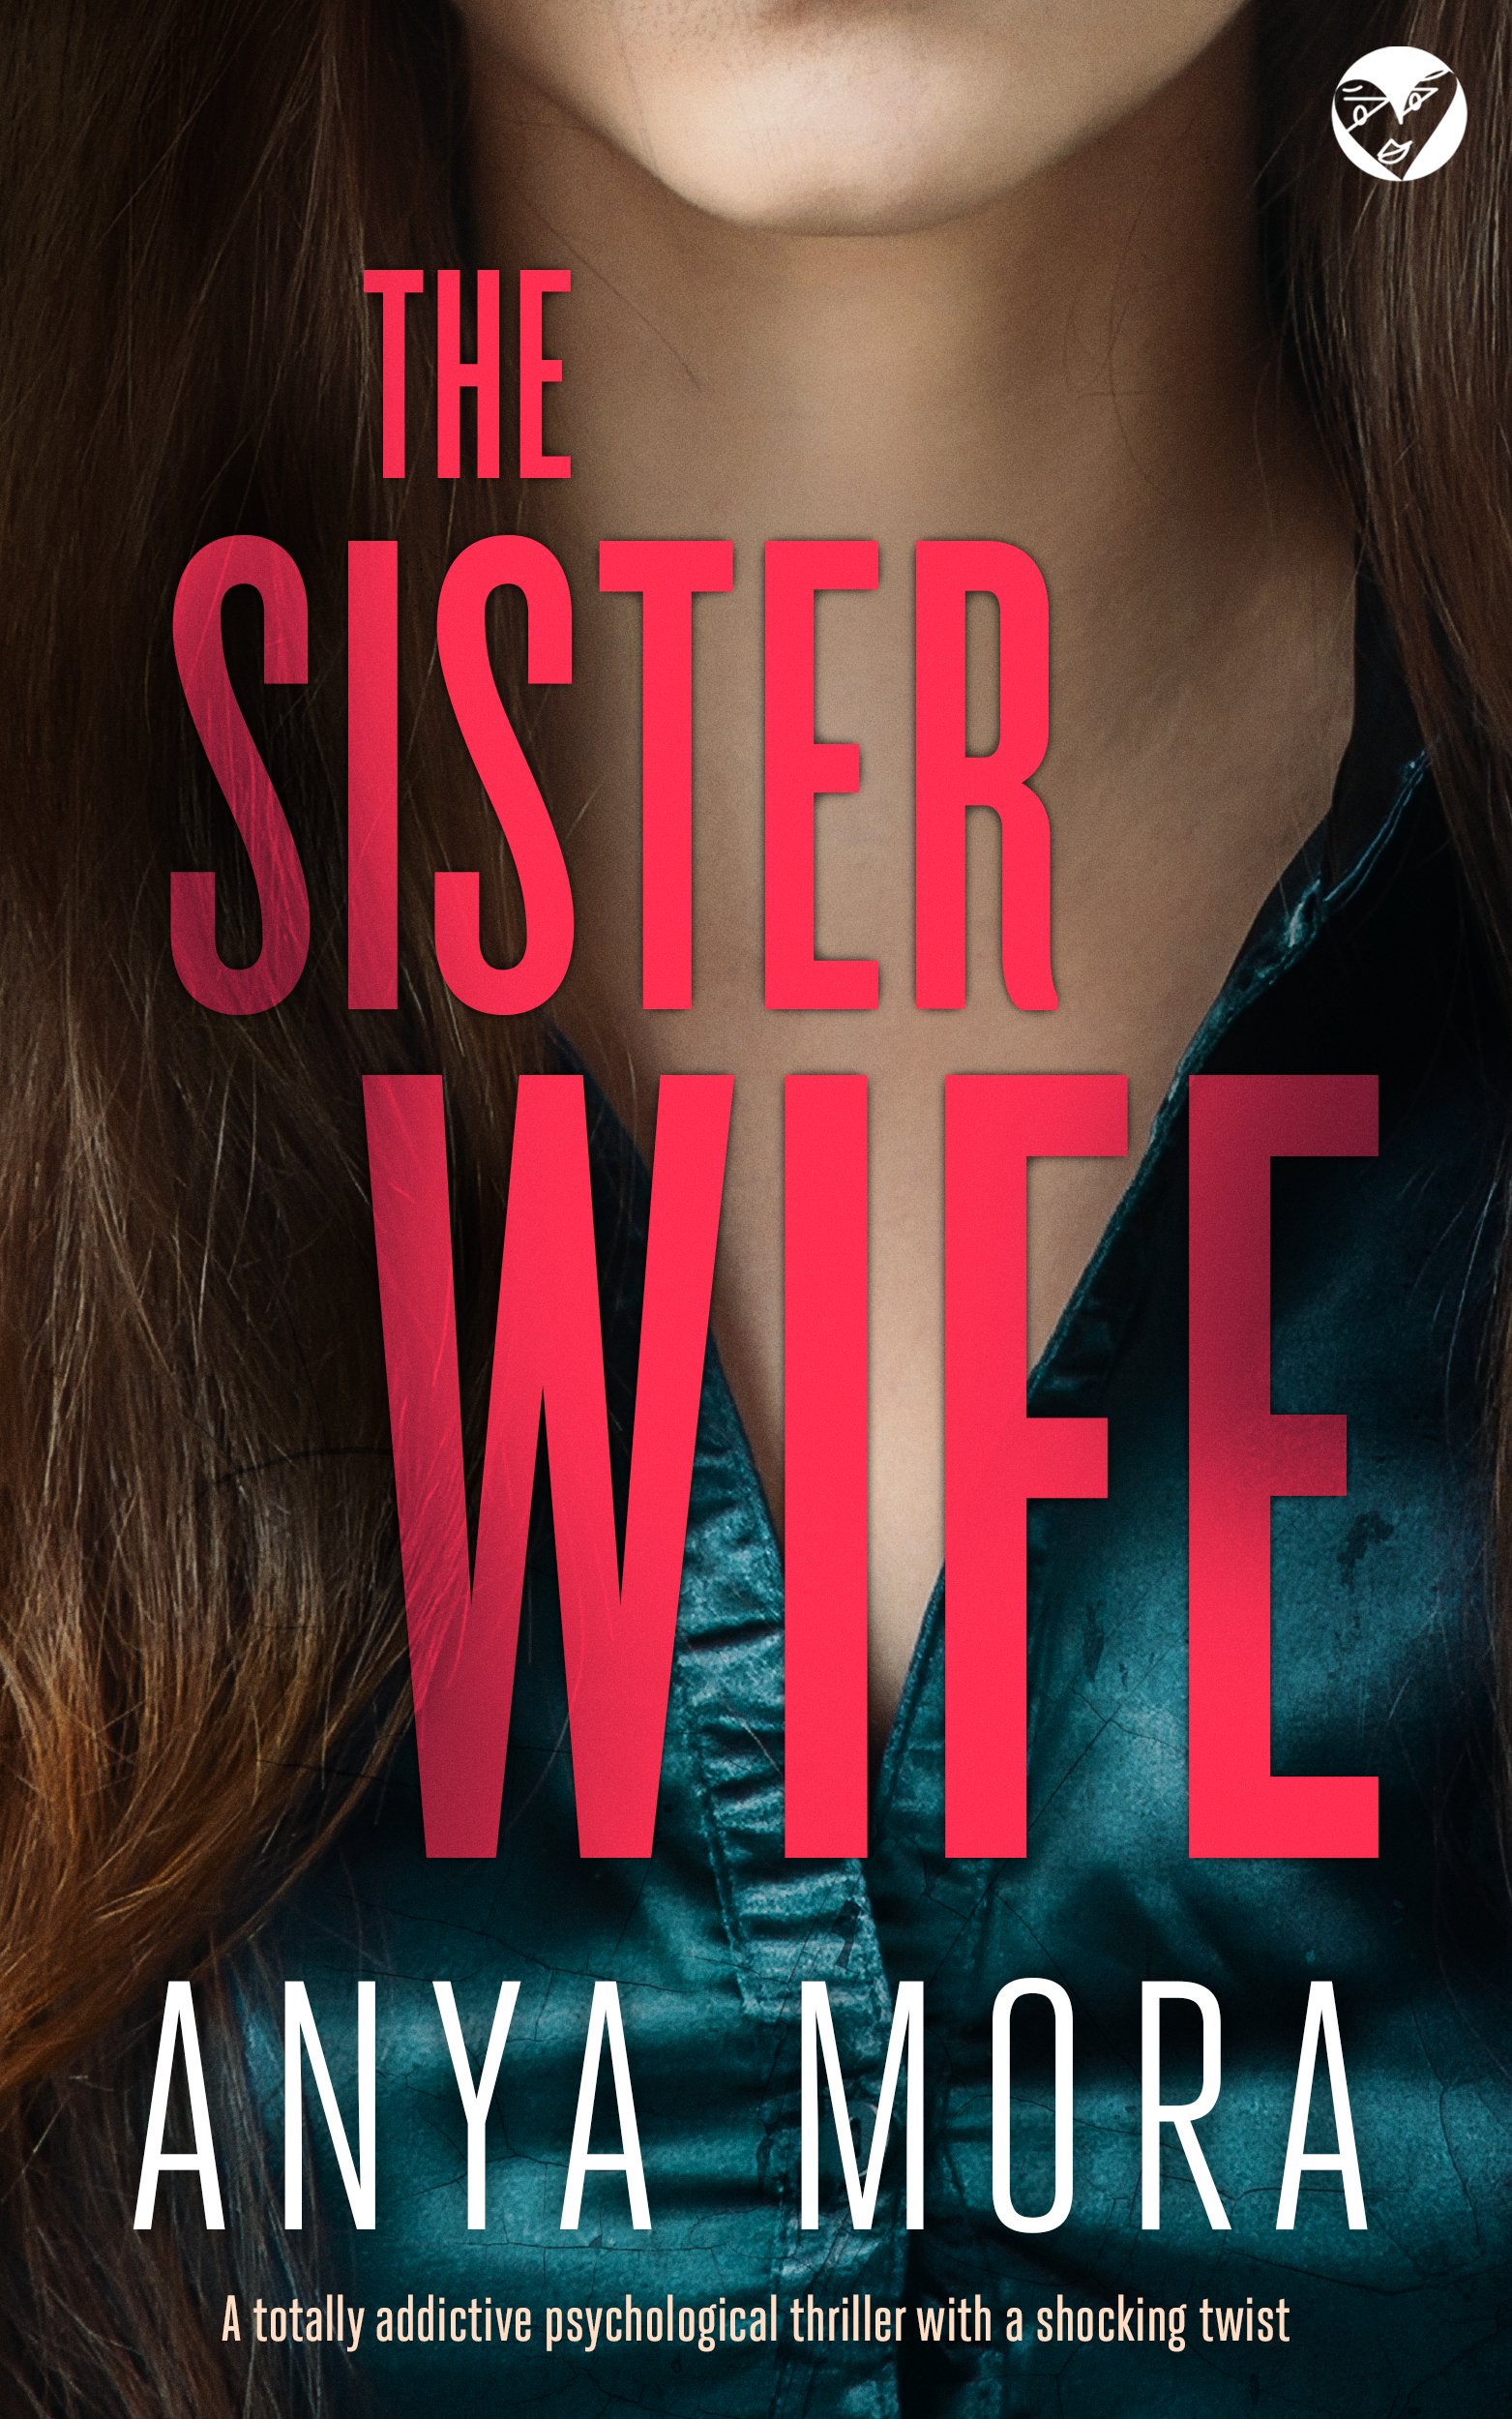 THE SISTER WIFE cover publish.jpg